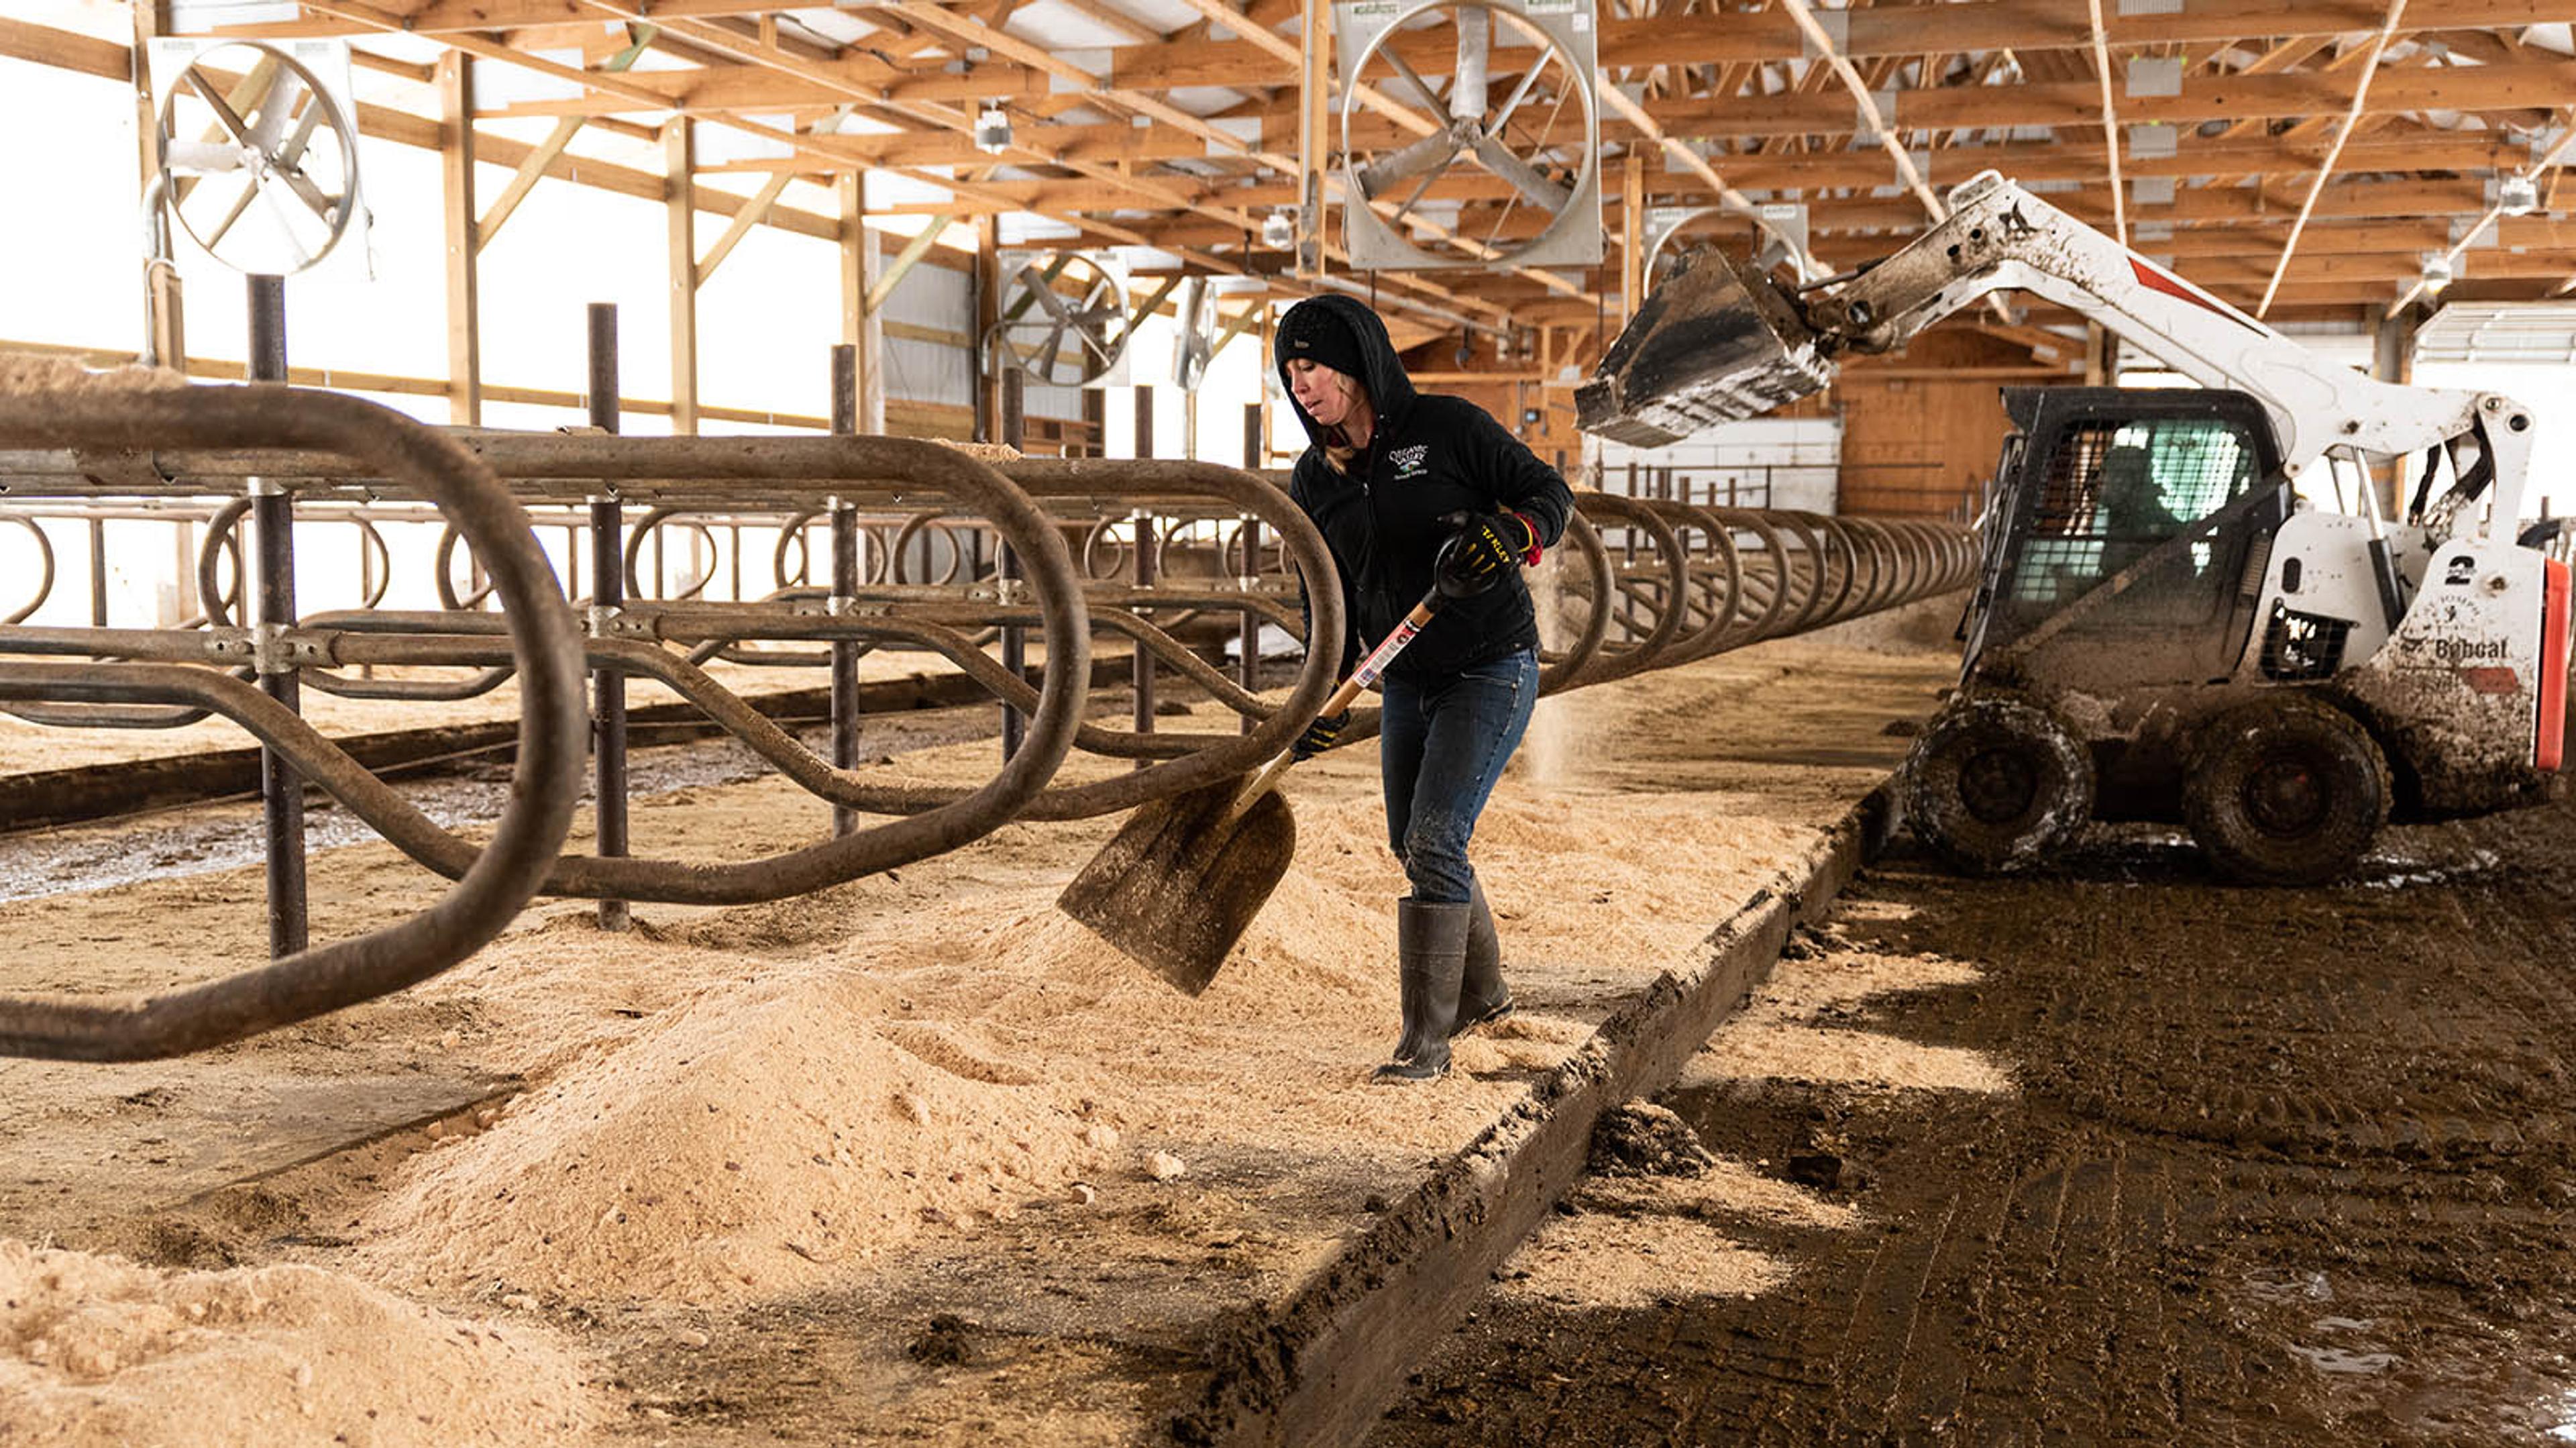 Kristina spreads out the bedding in the freestalls.